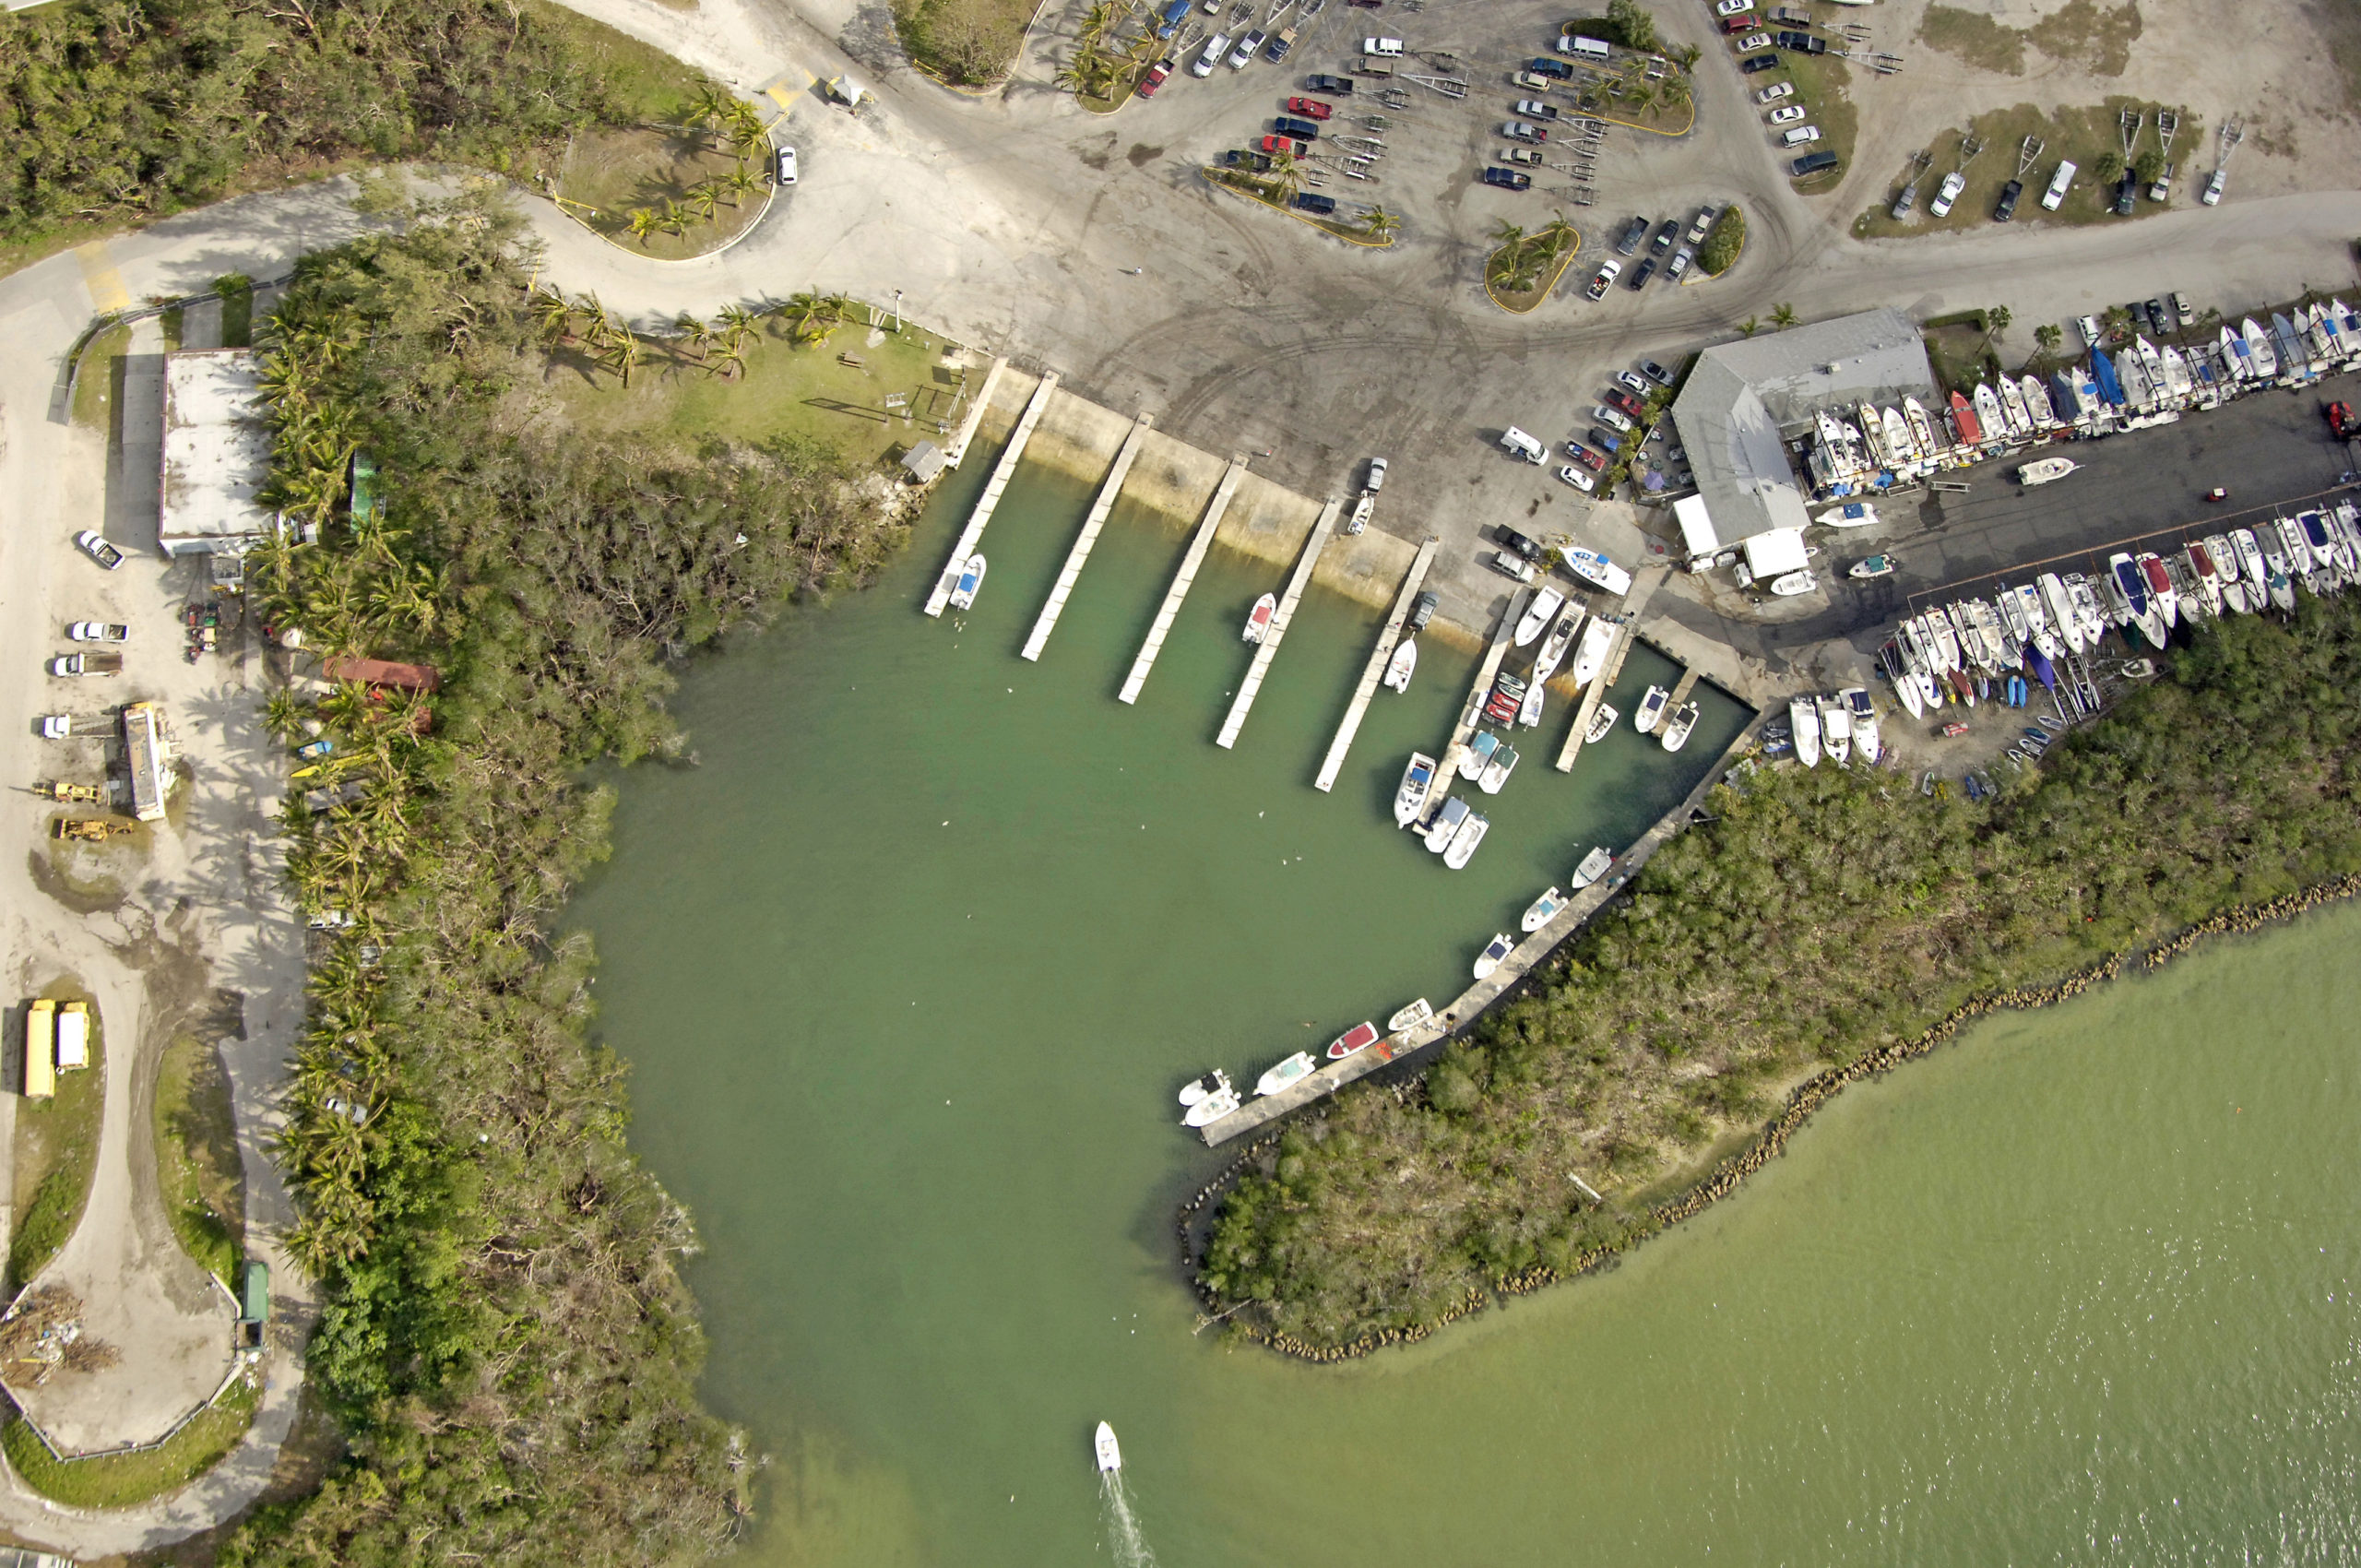 Boat launching ramps at Haulover Marine Center